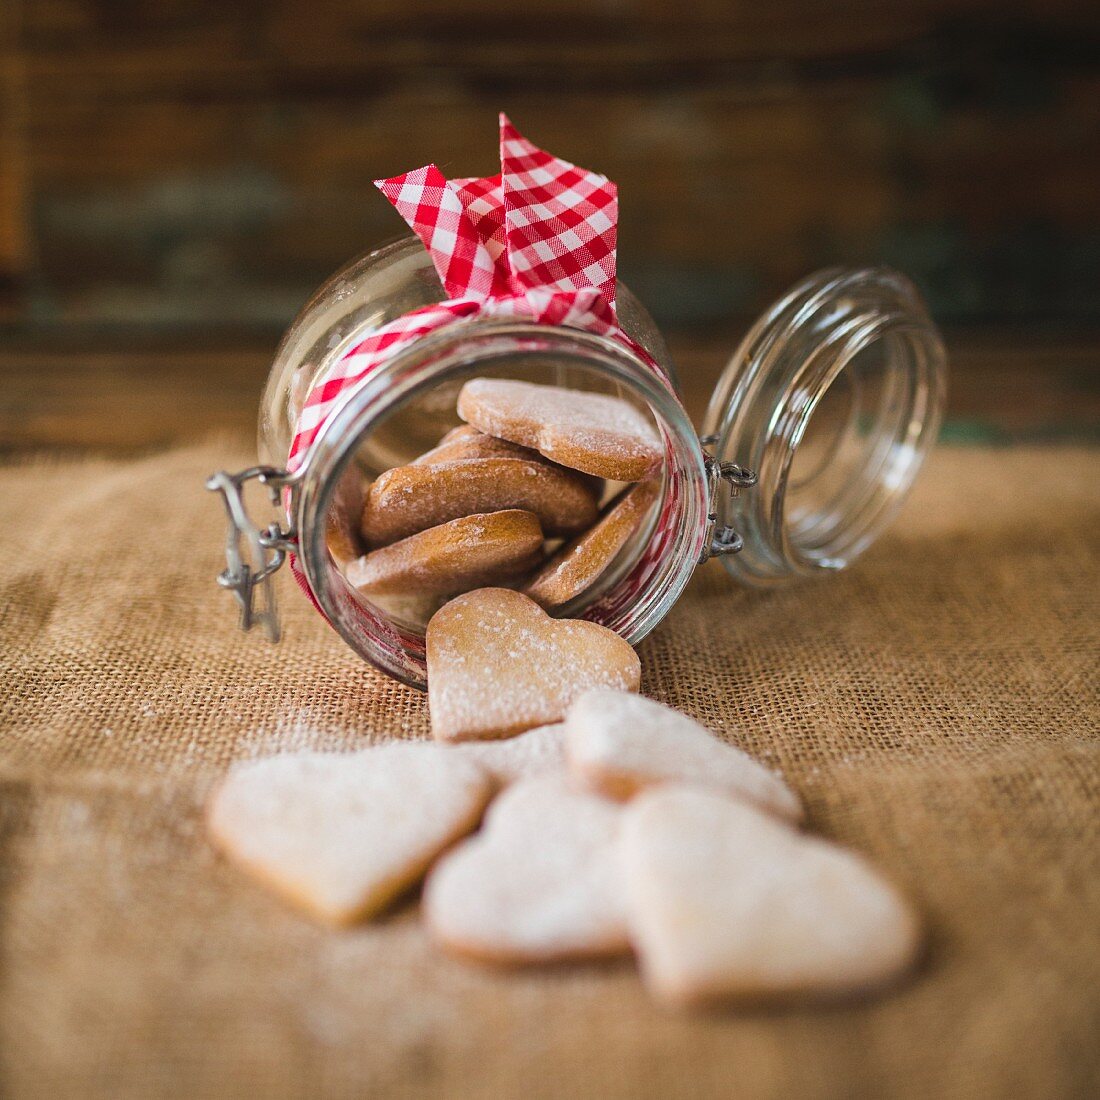 Preserving jar of heart-shaped shortbreads sprinkled with icing sugar on jute